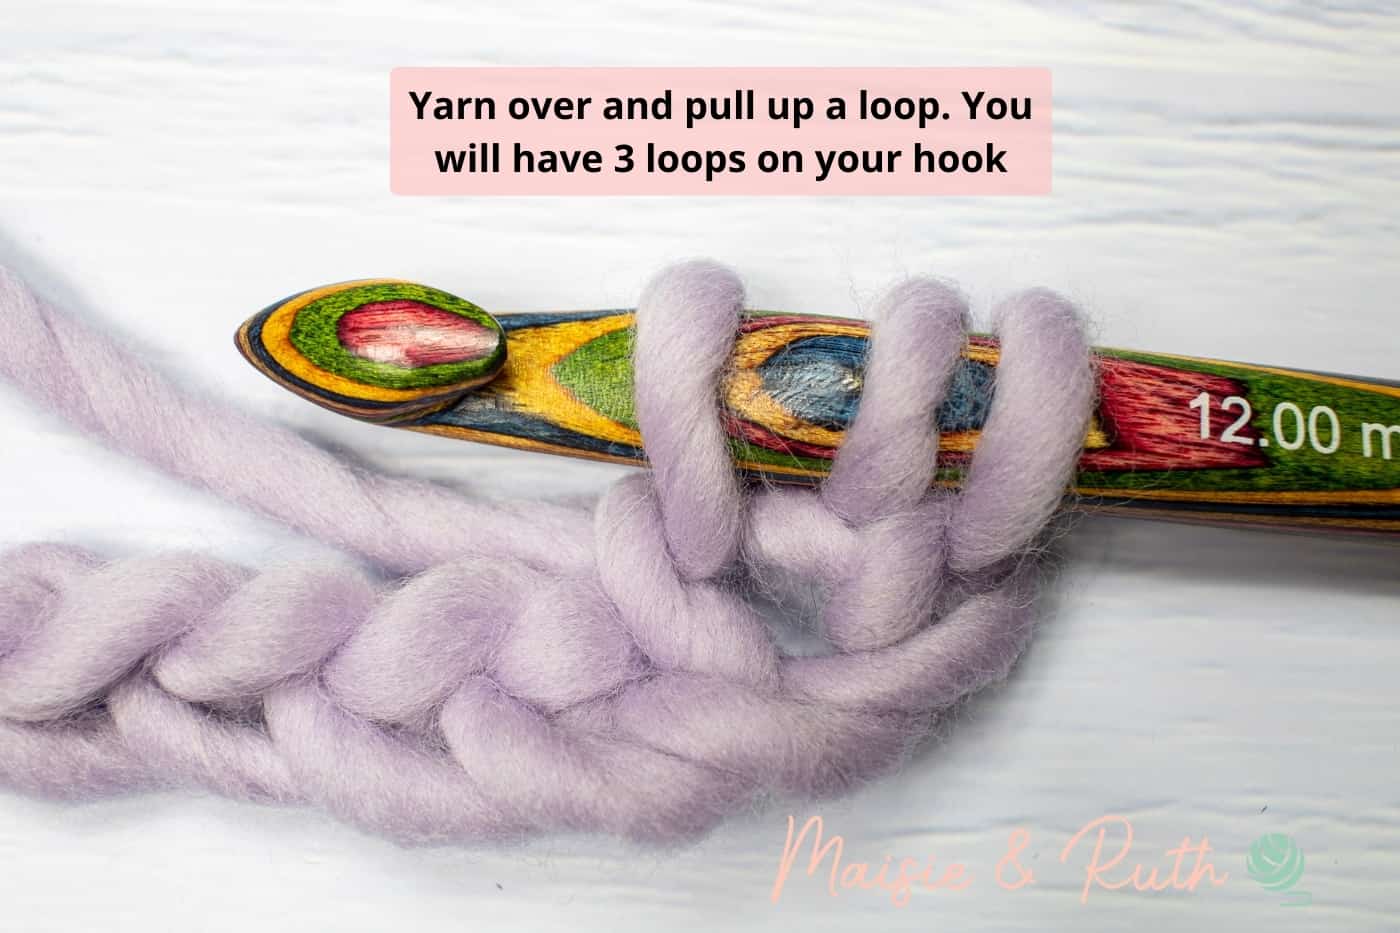 Yarn over and pull up a loop